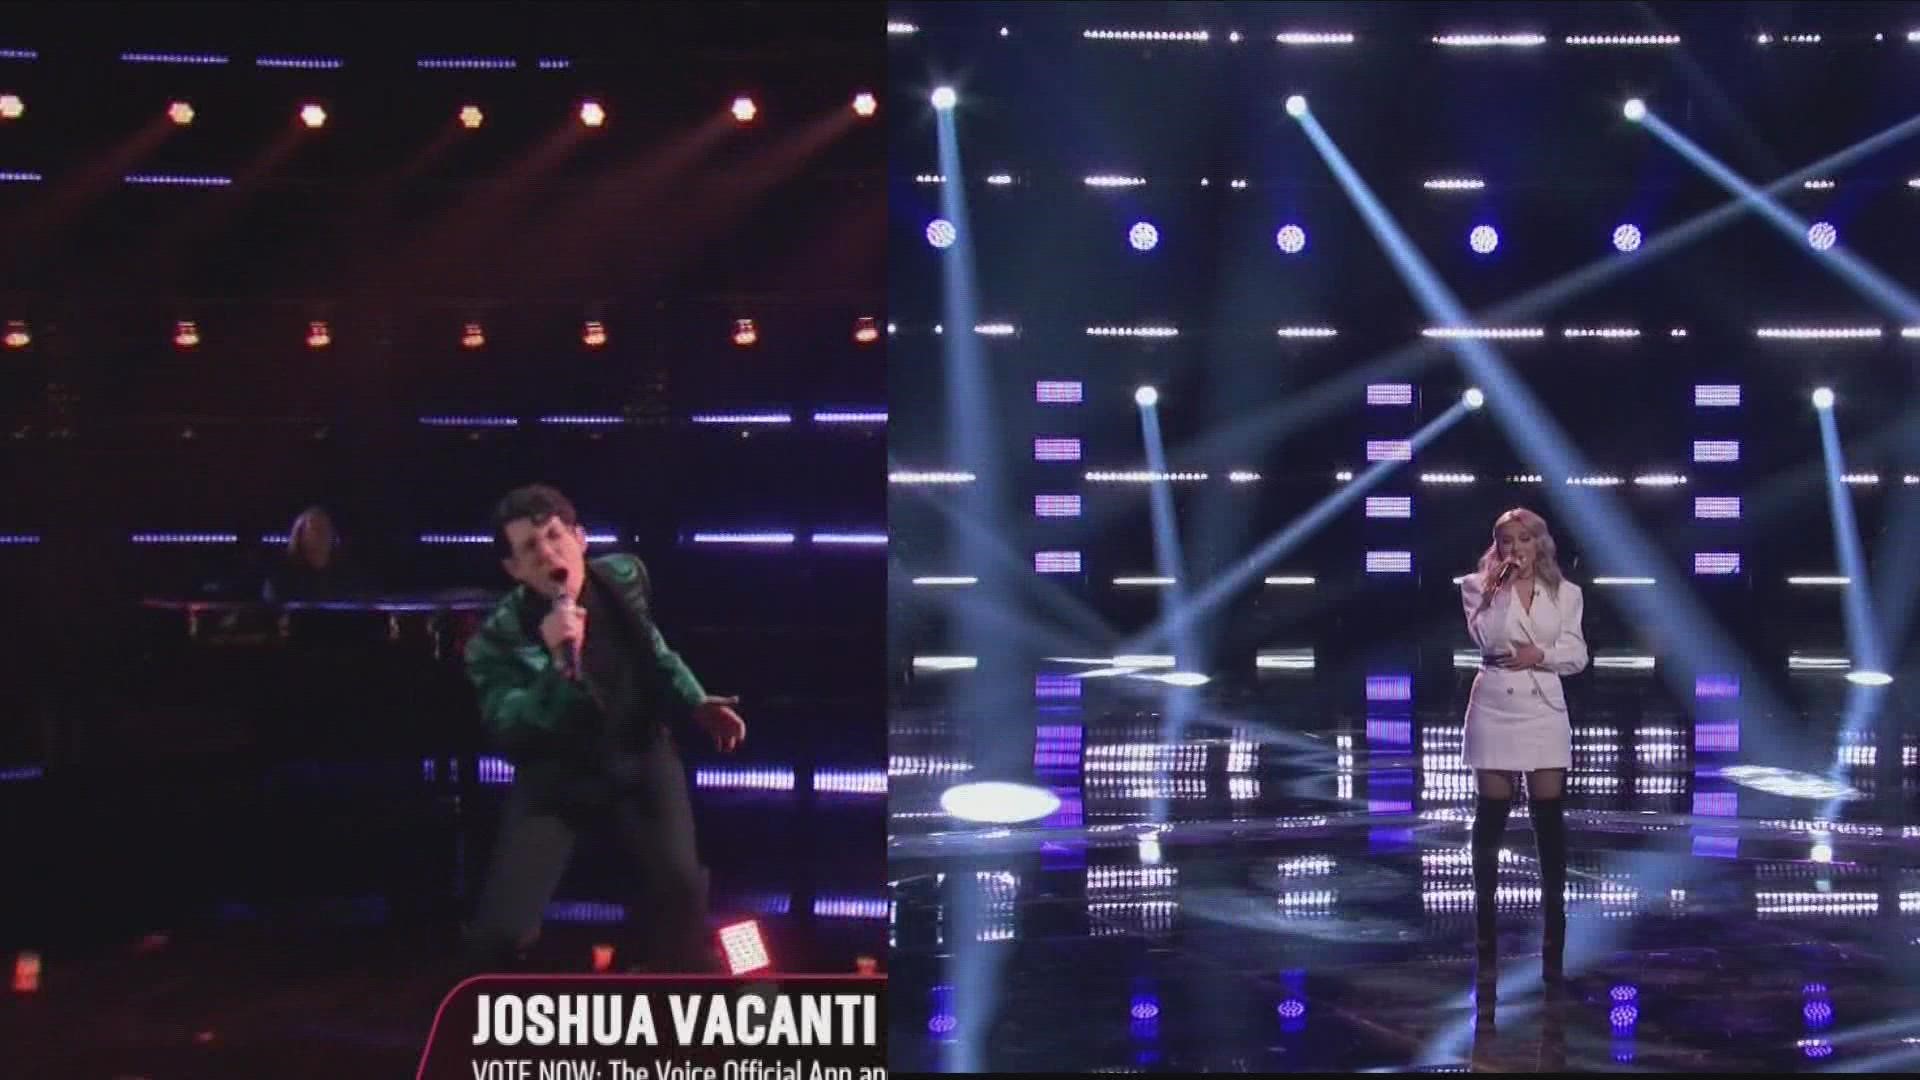 Cami Clune and Joshua Vacanti made names for themselves as finalists in NBC's The Voice.